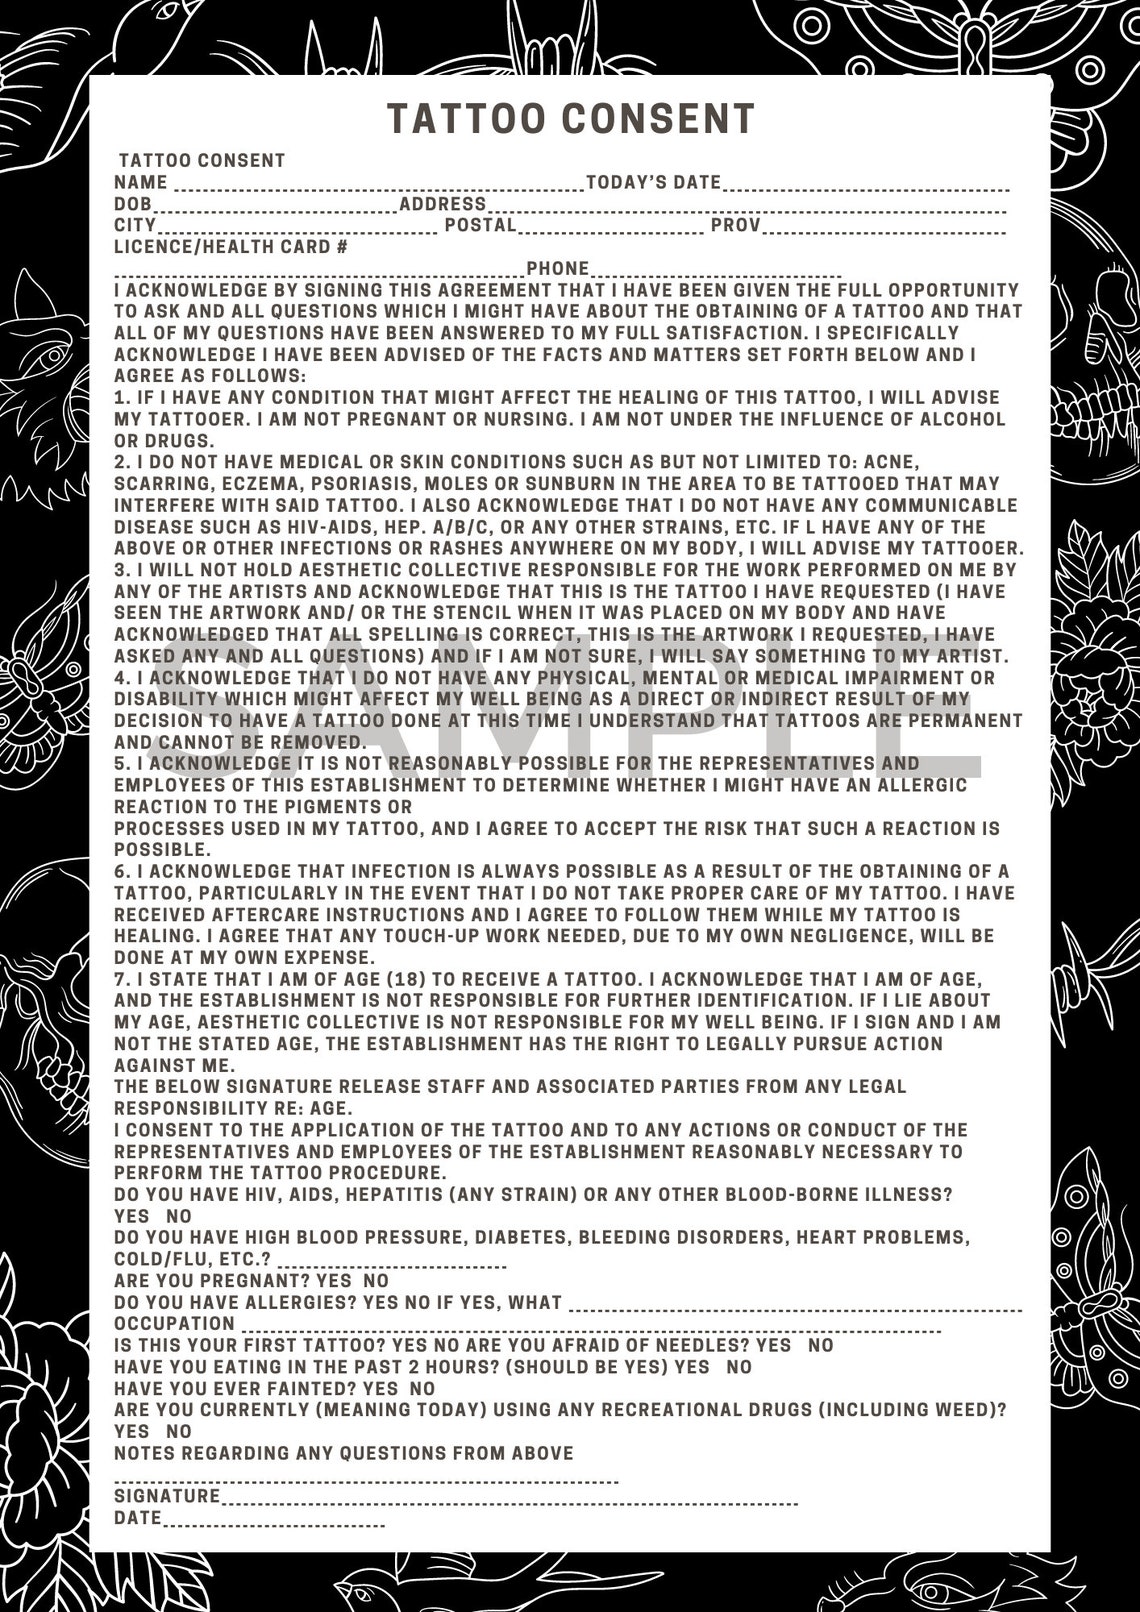 printable-tattoo-consent-form-waiver-etsy-uk